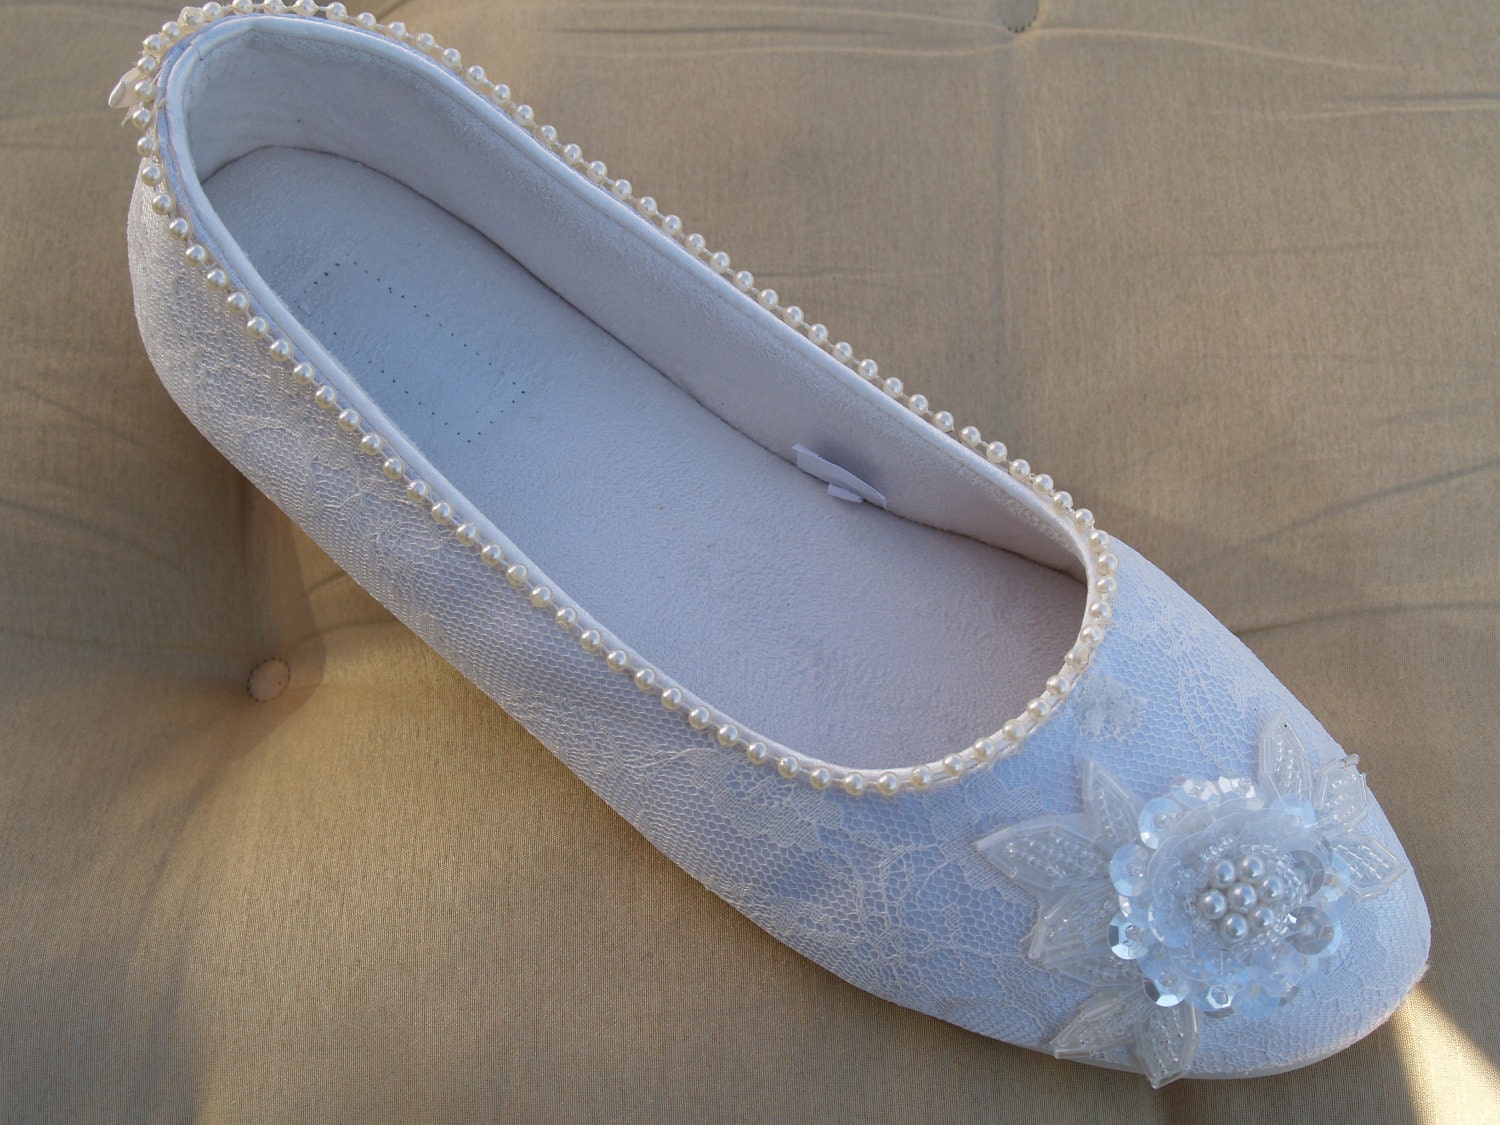 SIZE 9 Bridal Flats Ivory Vegan Shoes Victorian style hand sewn pearls and 